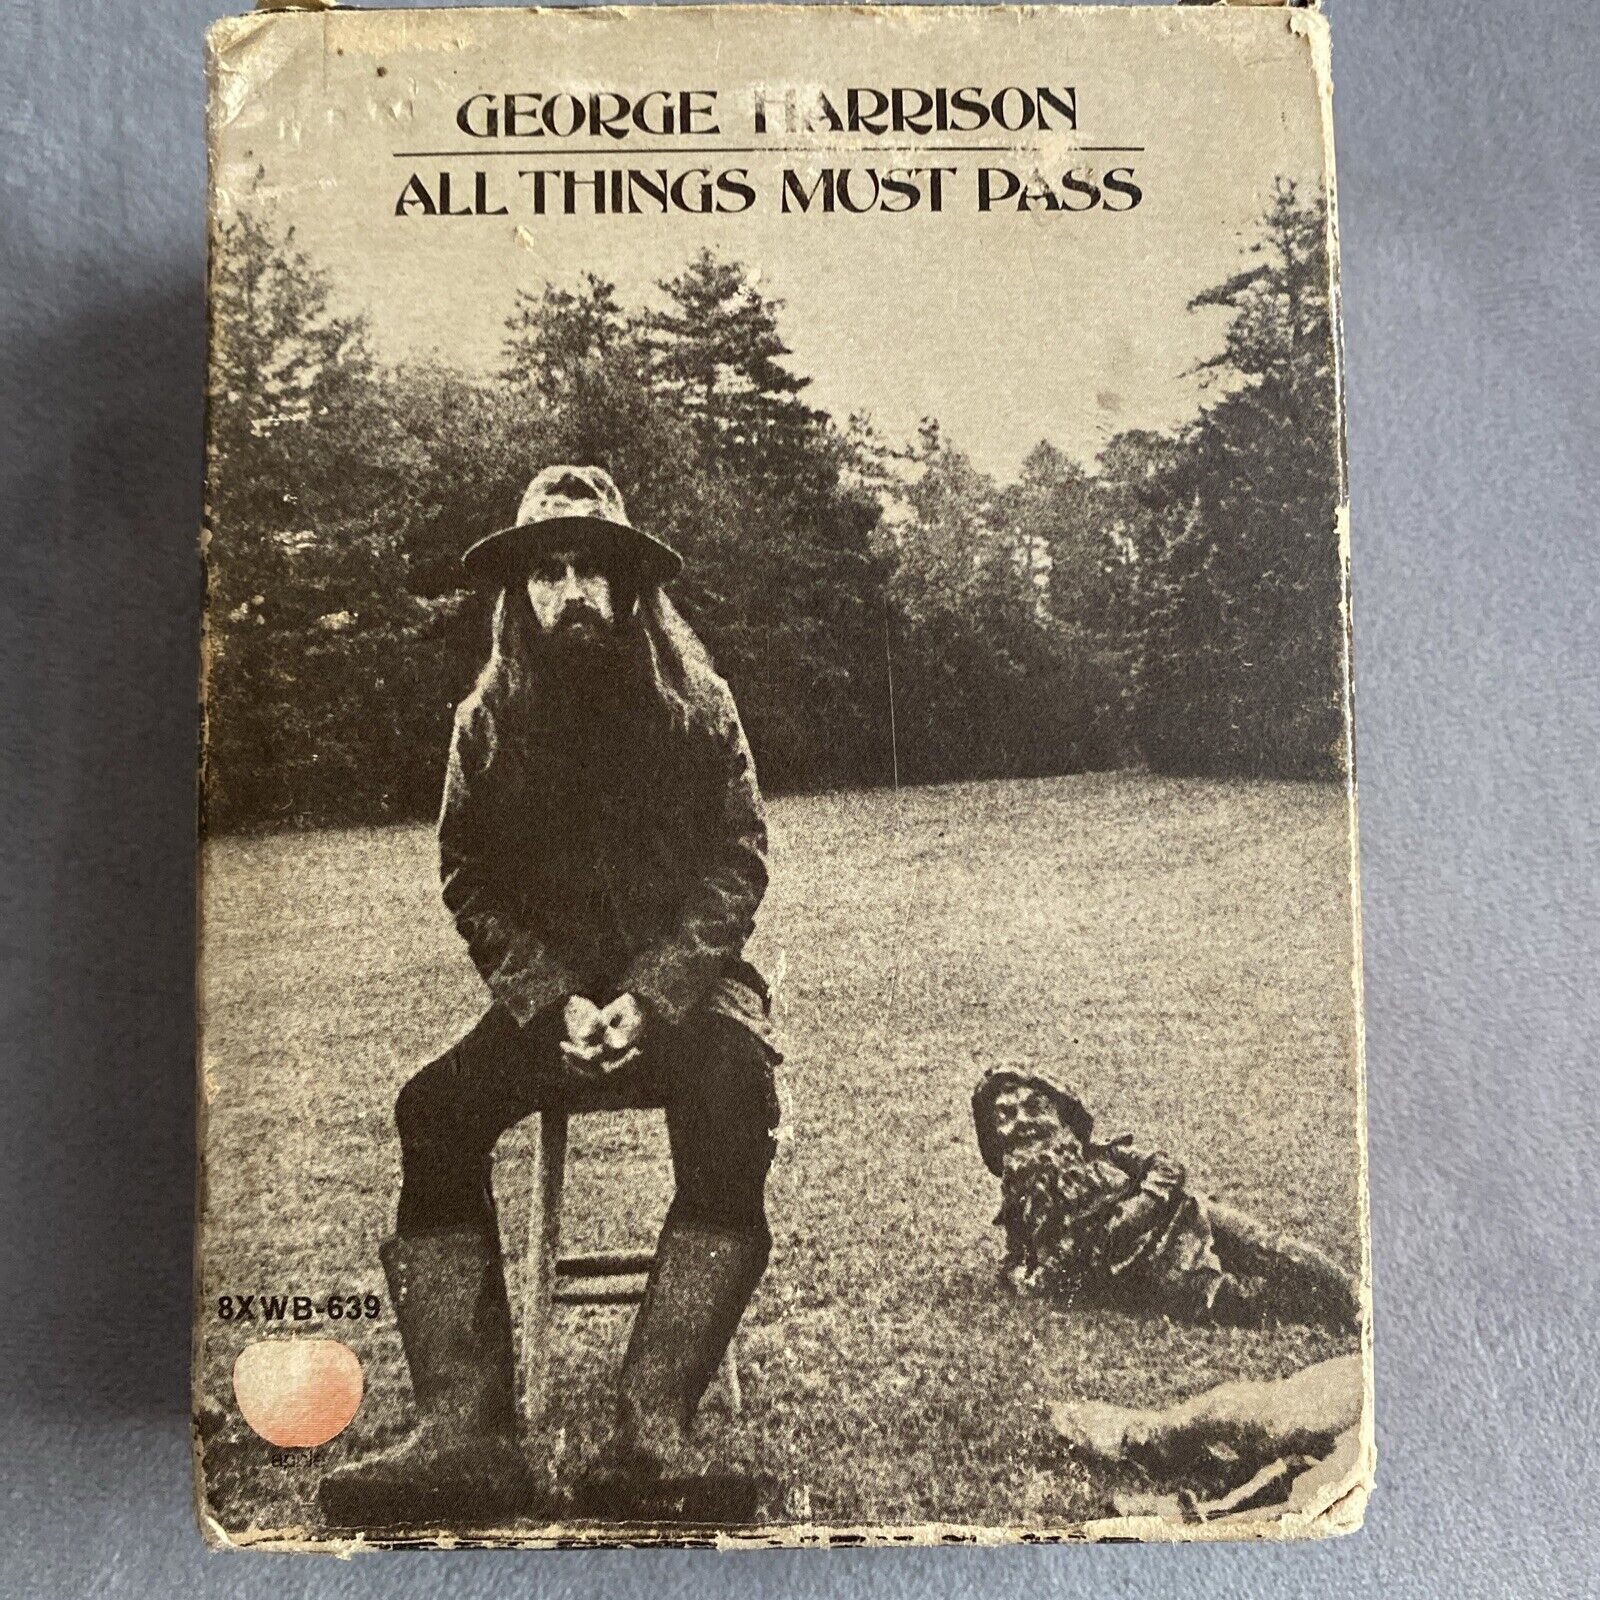 **RARE VINTAGE** George Harrison All Things Must Pass **8 TRACK** Box Set